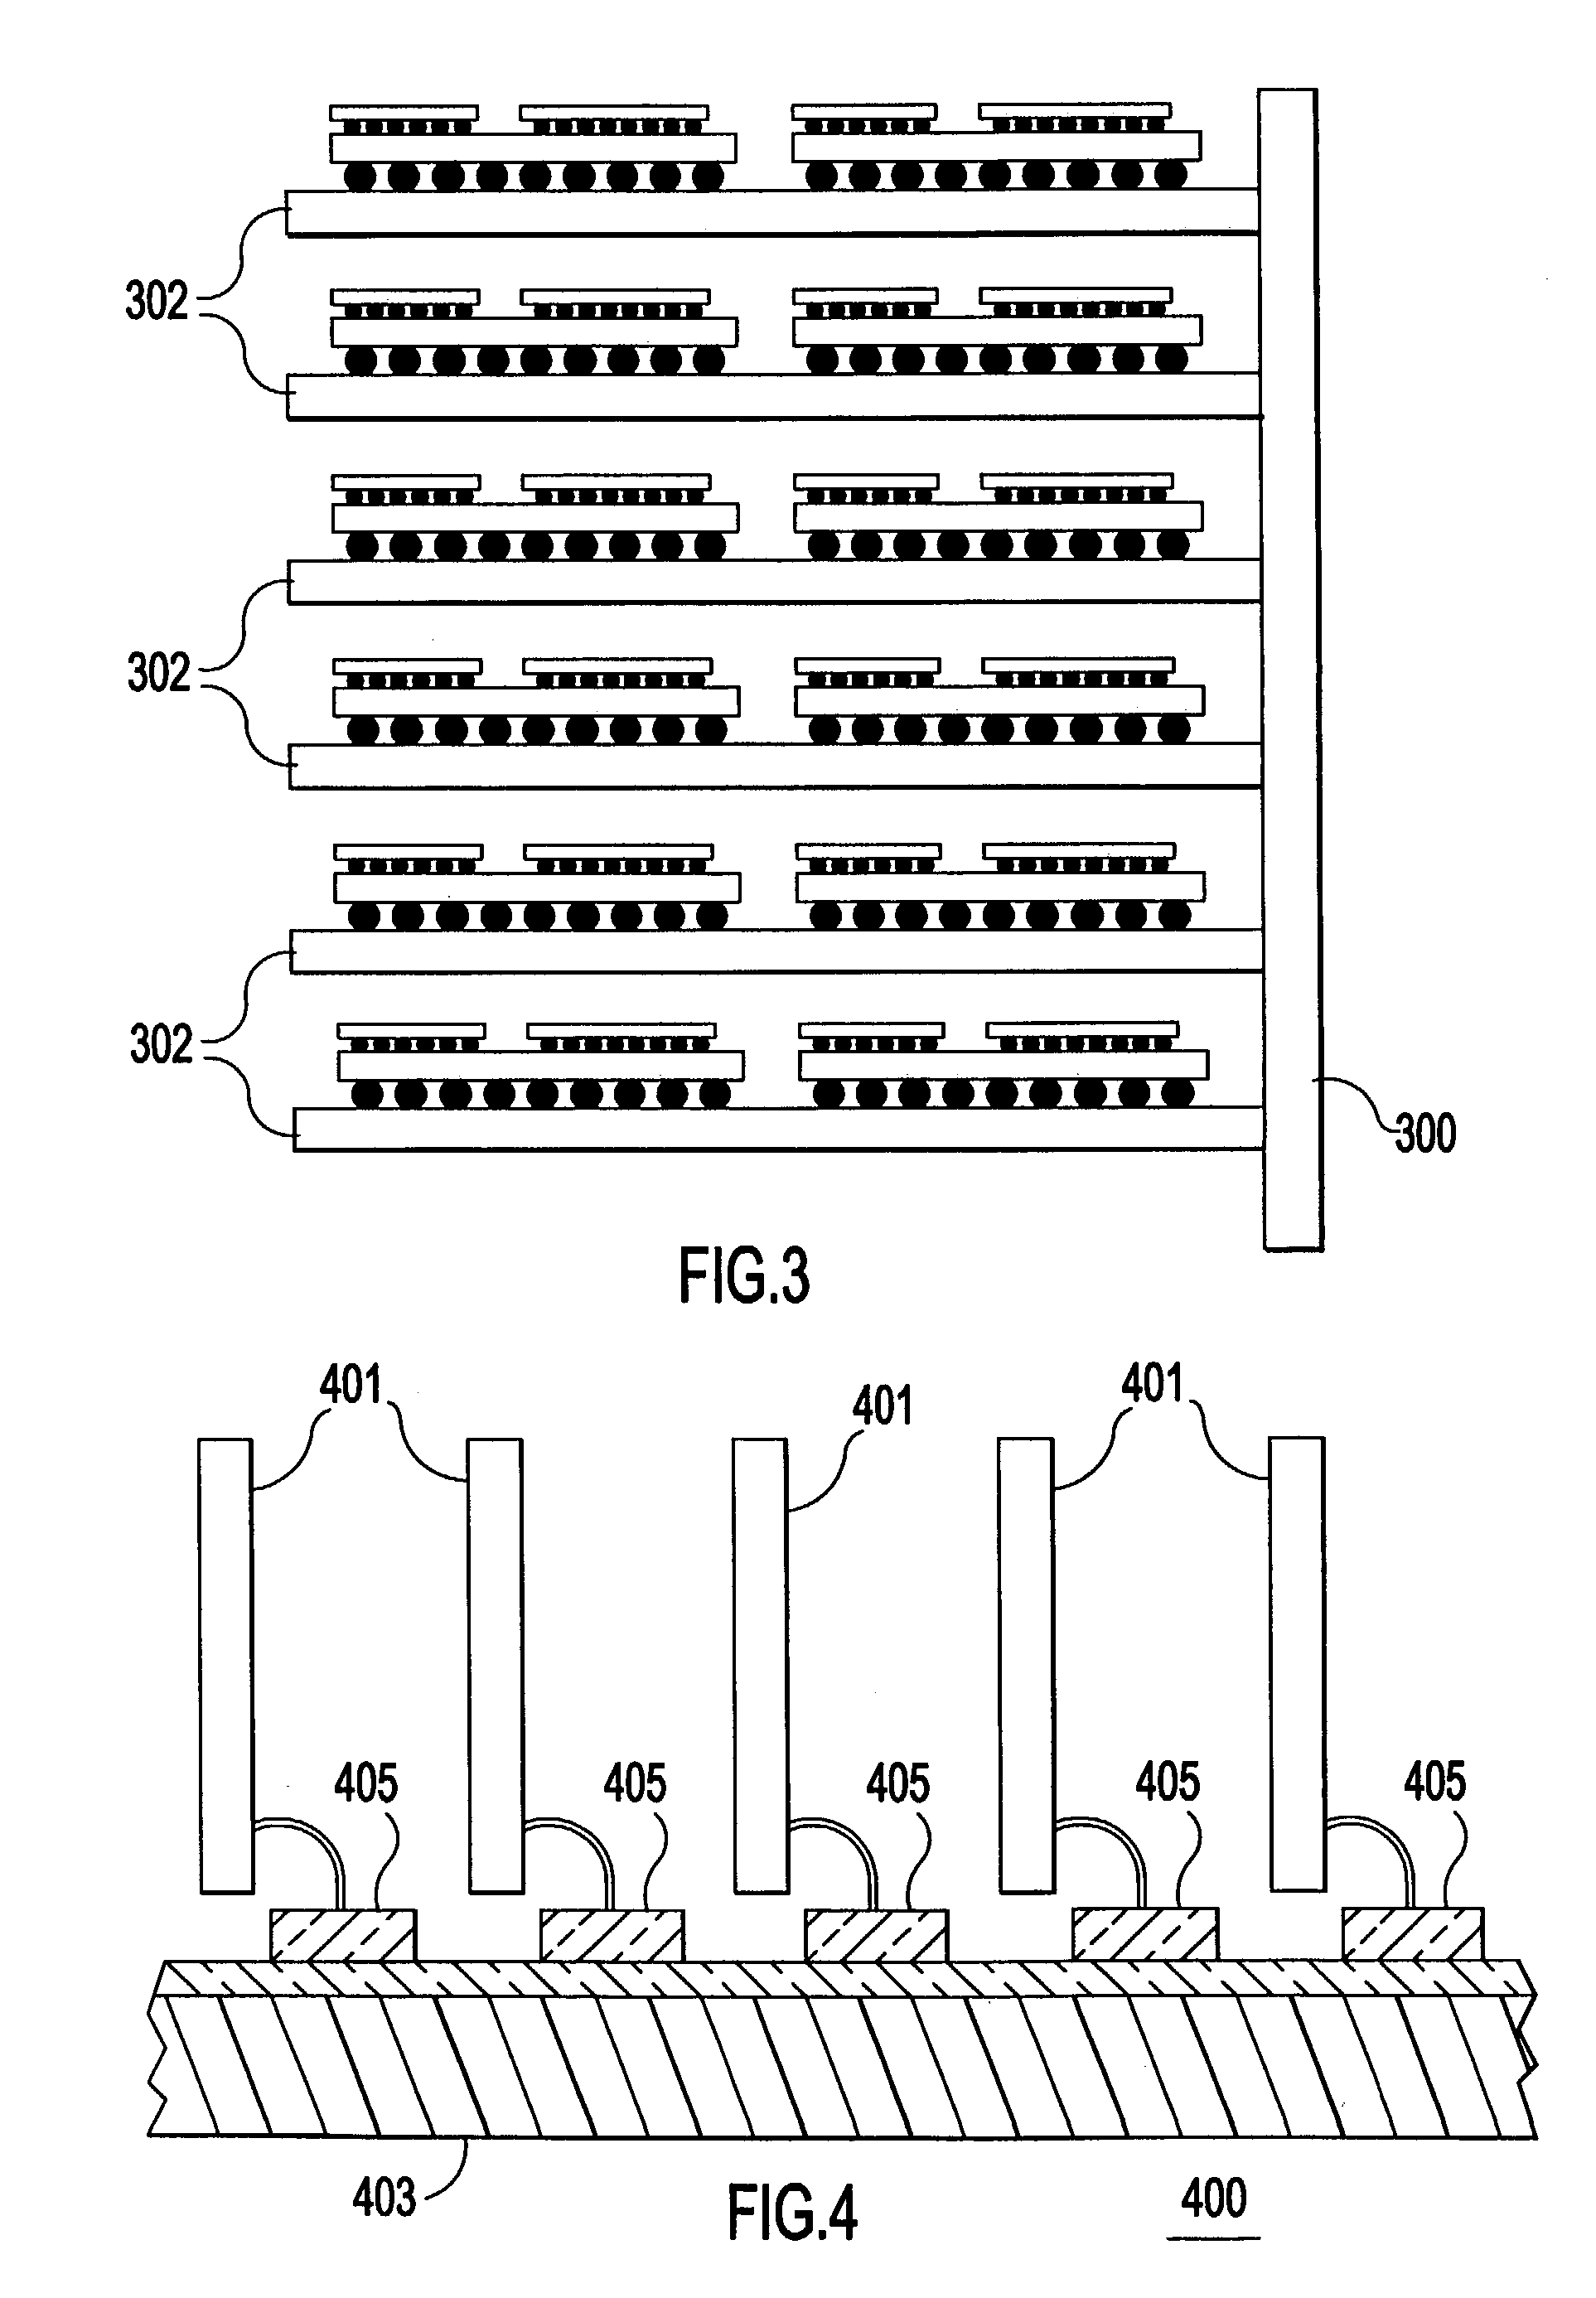 Method for in-situ continuity check on an optical bus